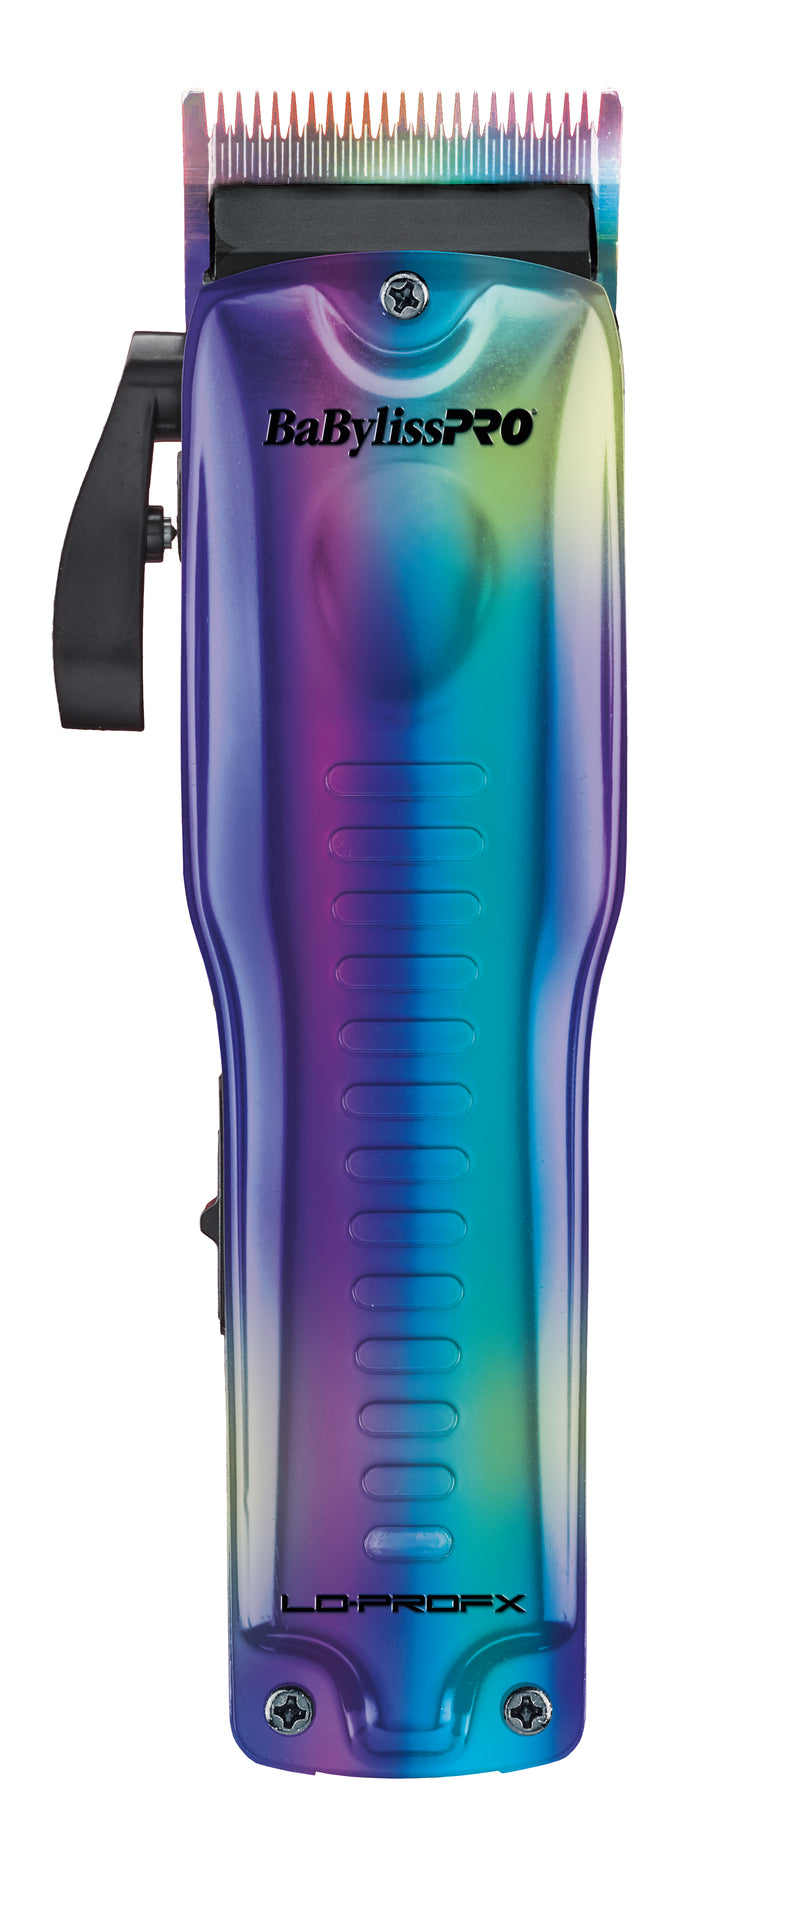 BaByliss PRO Limited Edition Iridescent Lo-Pro FX High-Performance ...